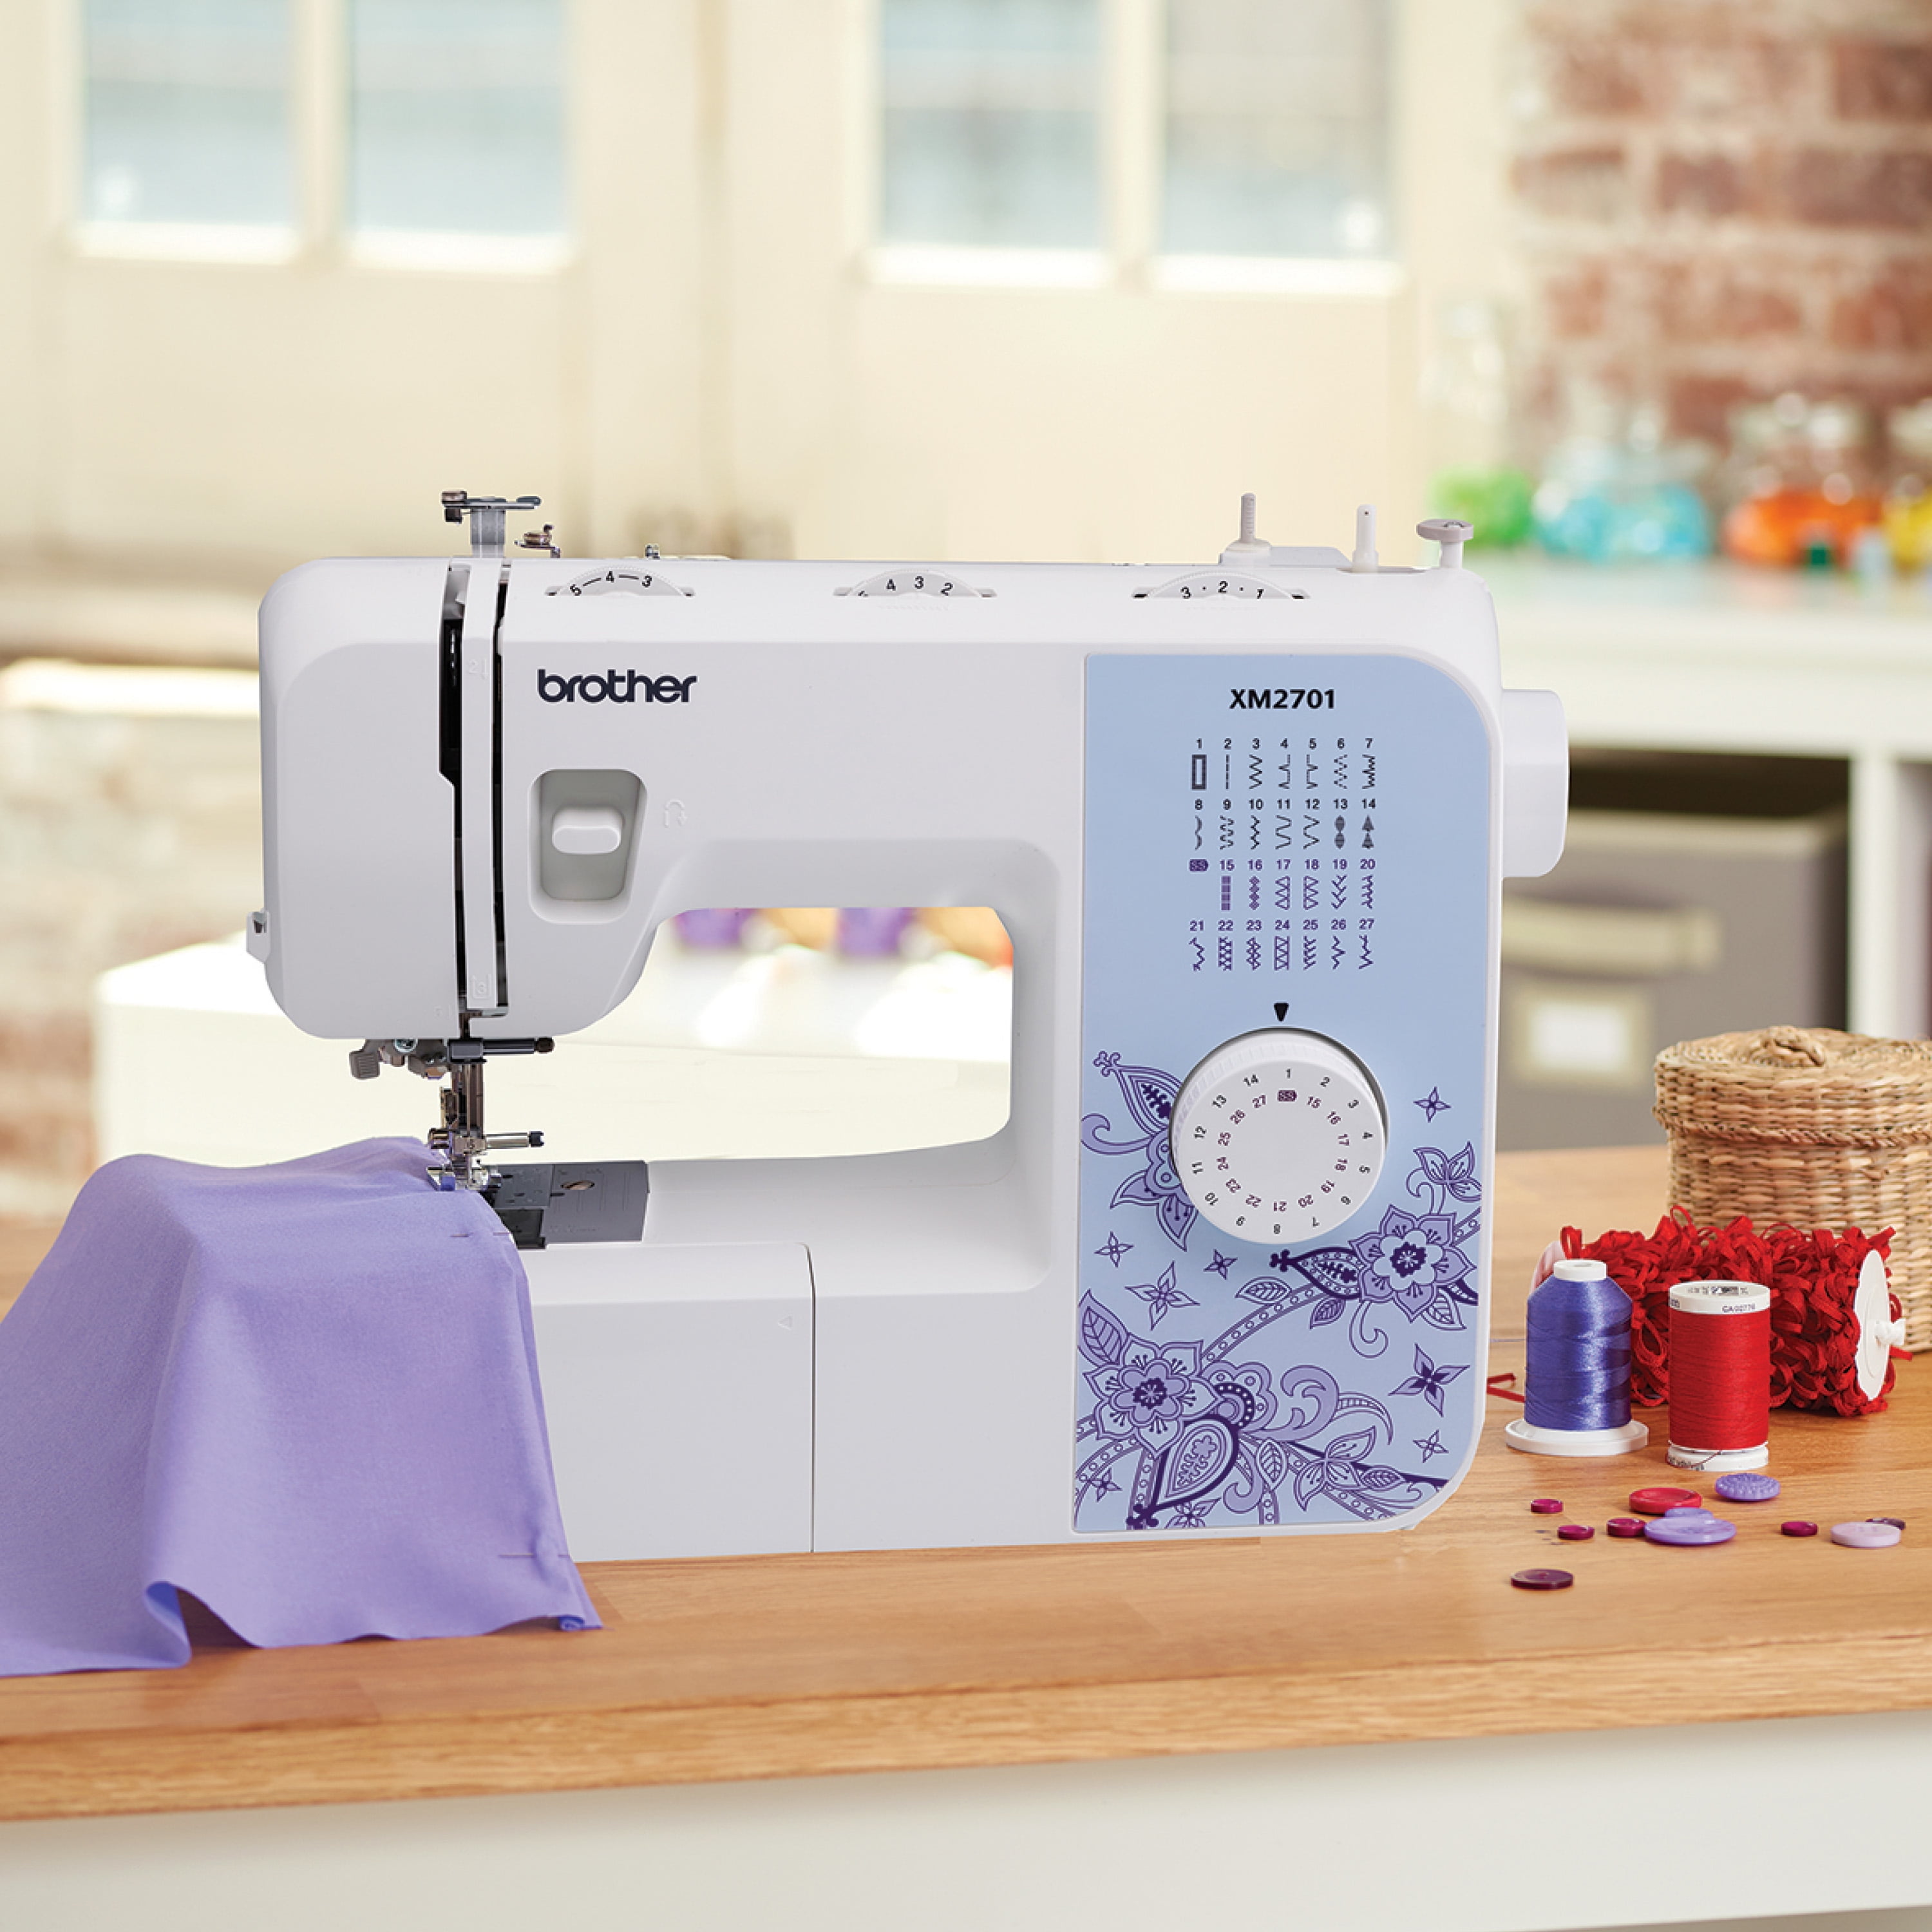 Get to know the parts of Brother XM2701 Sewing Machine 